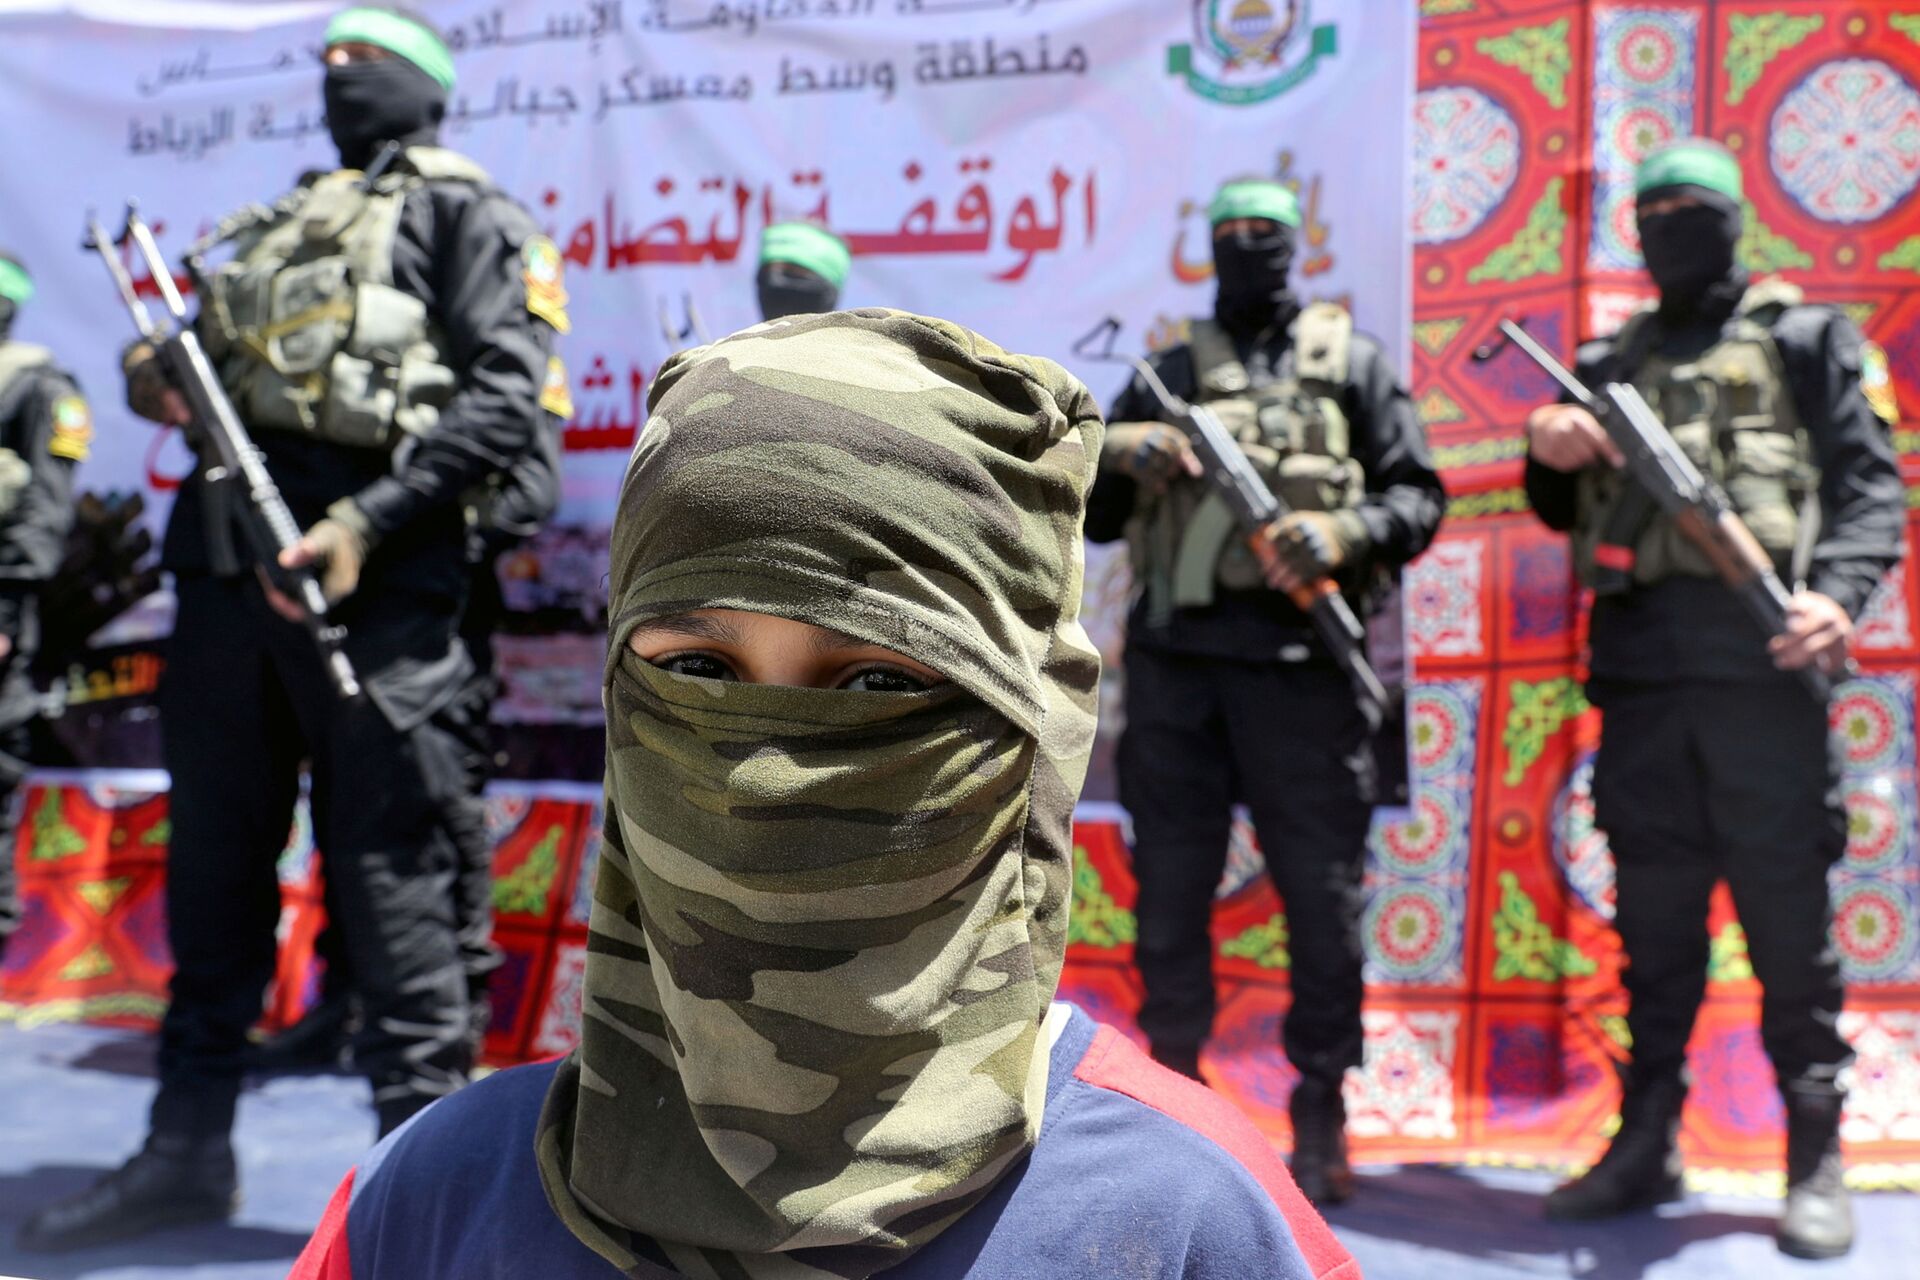 A masked Palestinian boy looks on as Hamas militant take part in a protest over the possible eviction of several Palestinian families from homes on land claimed by Jewish settlers in the Jerusalem's Sheikh Jarrah neighbourhood, in the northern Gaza Strip May 7, 2021 - Sputnik International, 1920, 17.10.2021